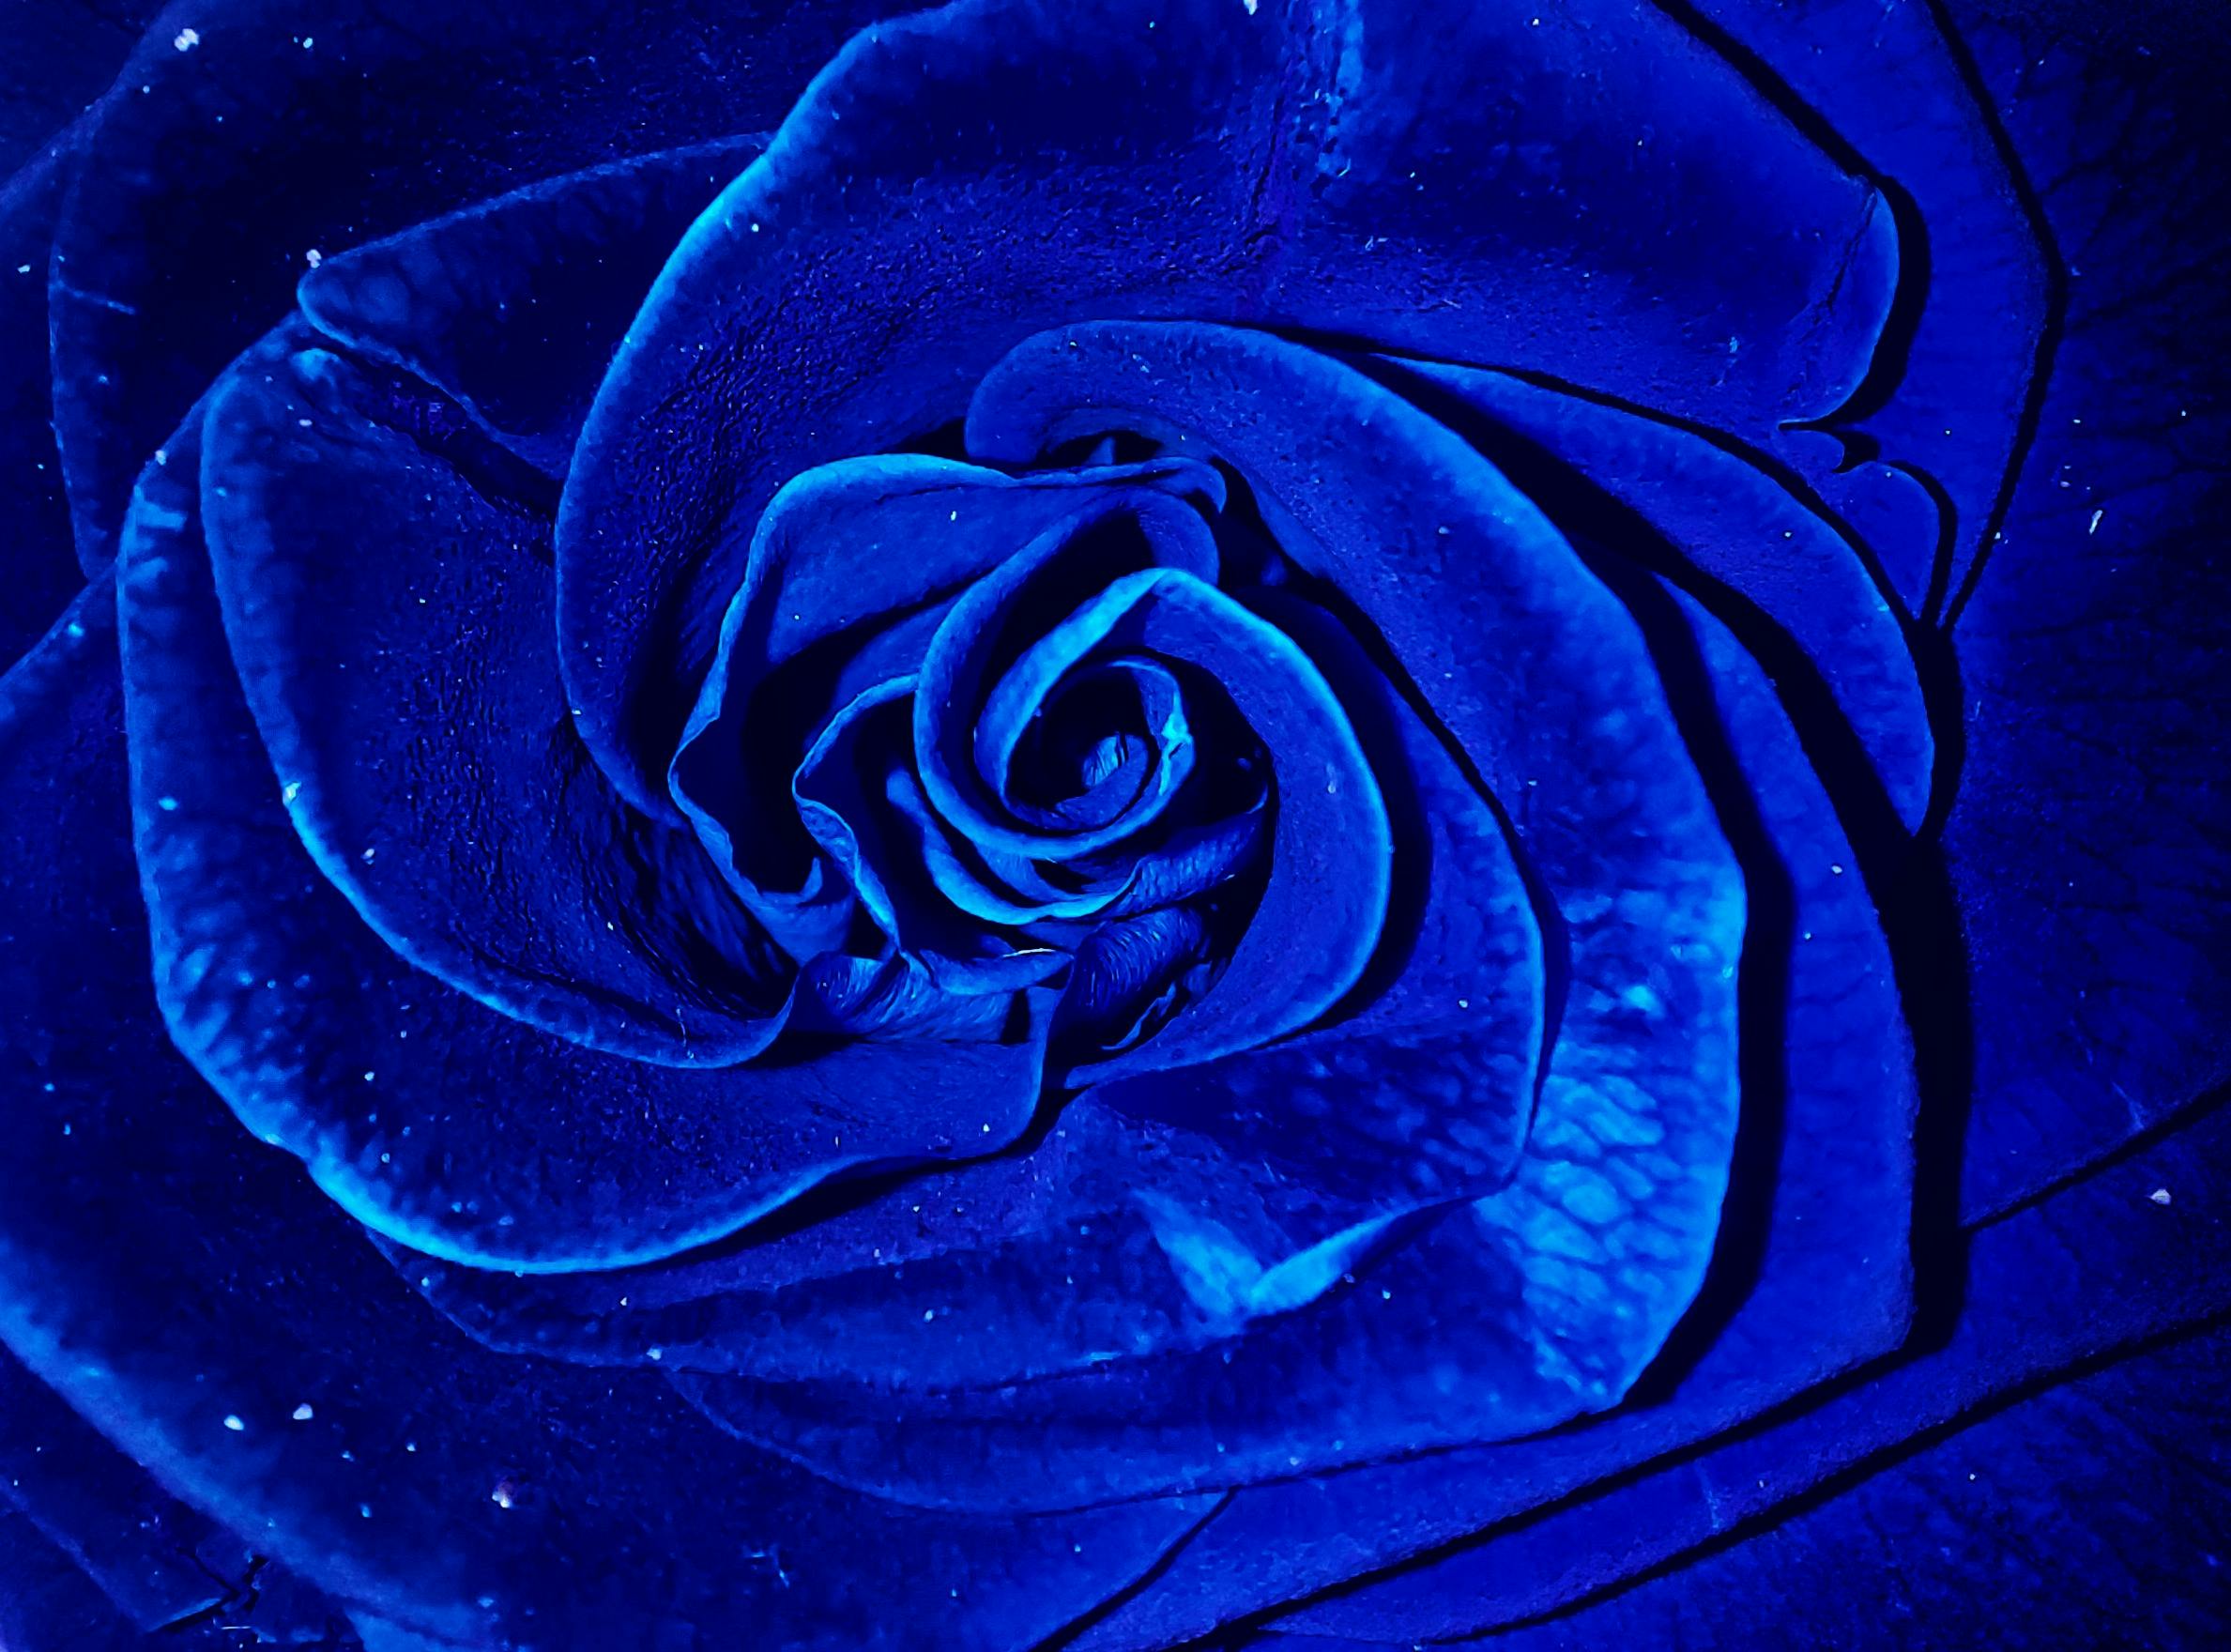 Blue Rose wallpaper by Sonia  Download on ZEDGE  9057